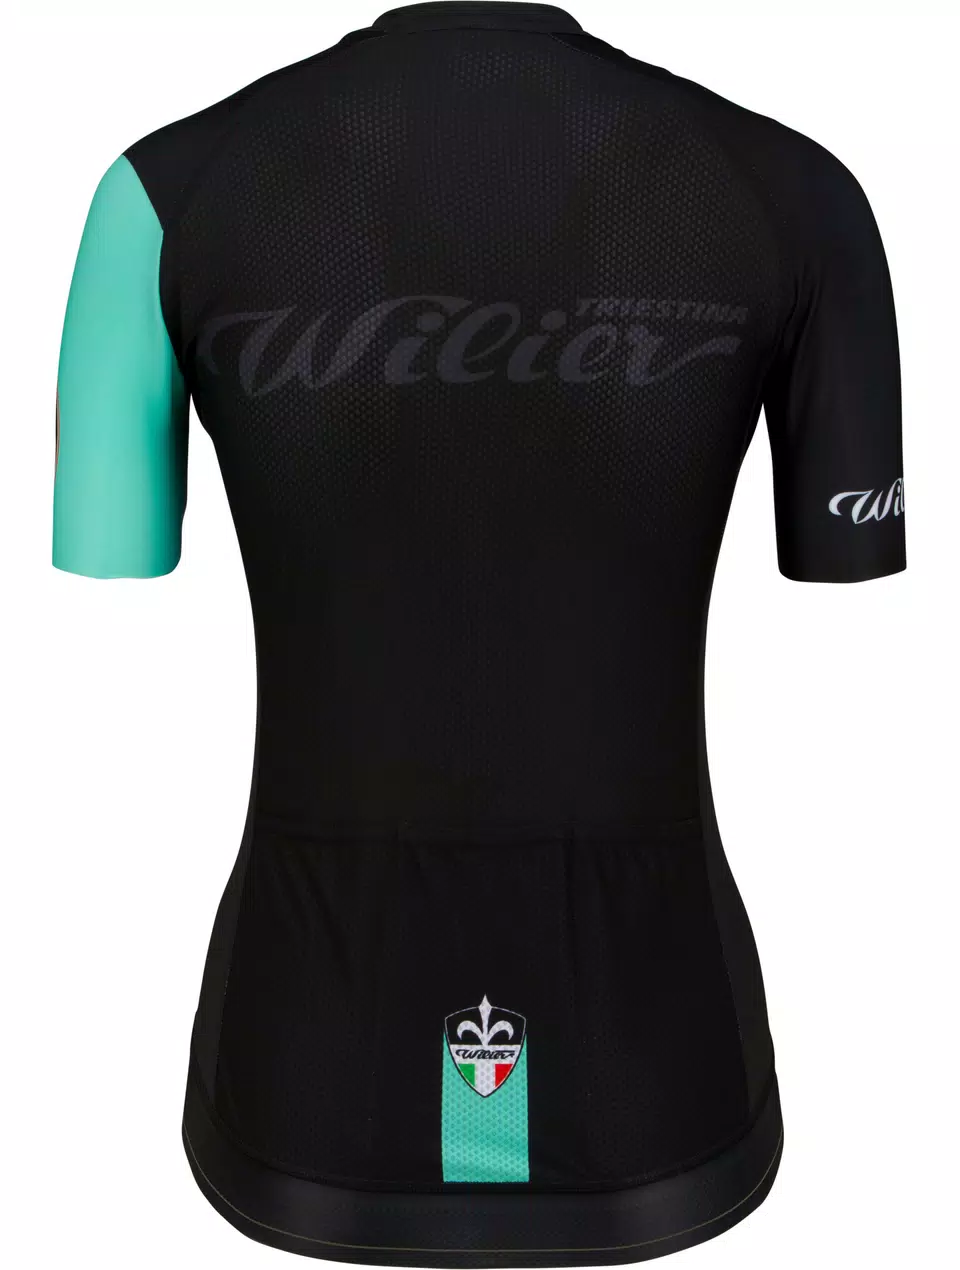 Maglia donna Wilier Cycling Club nera